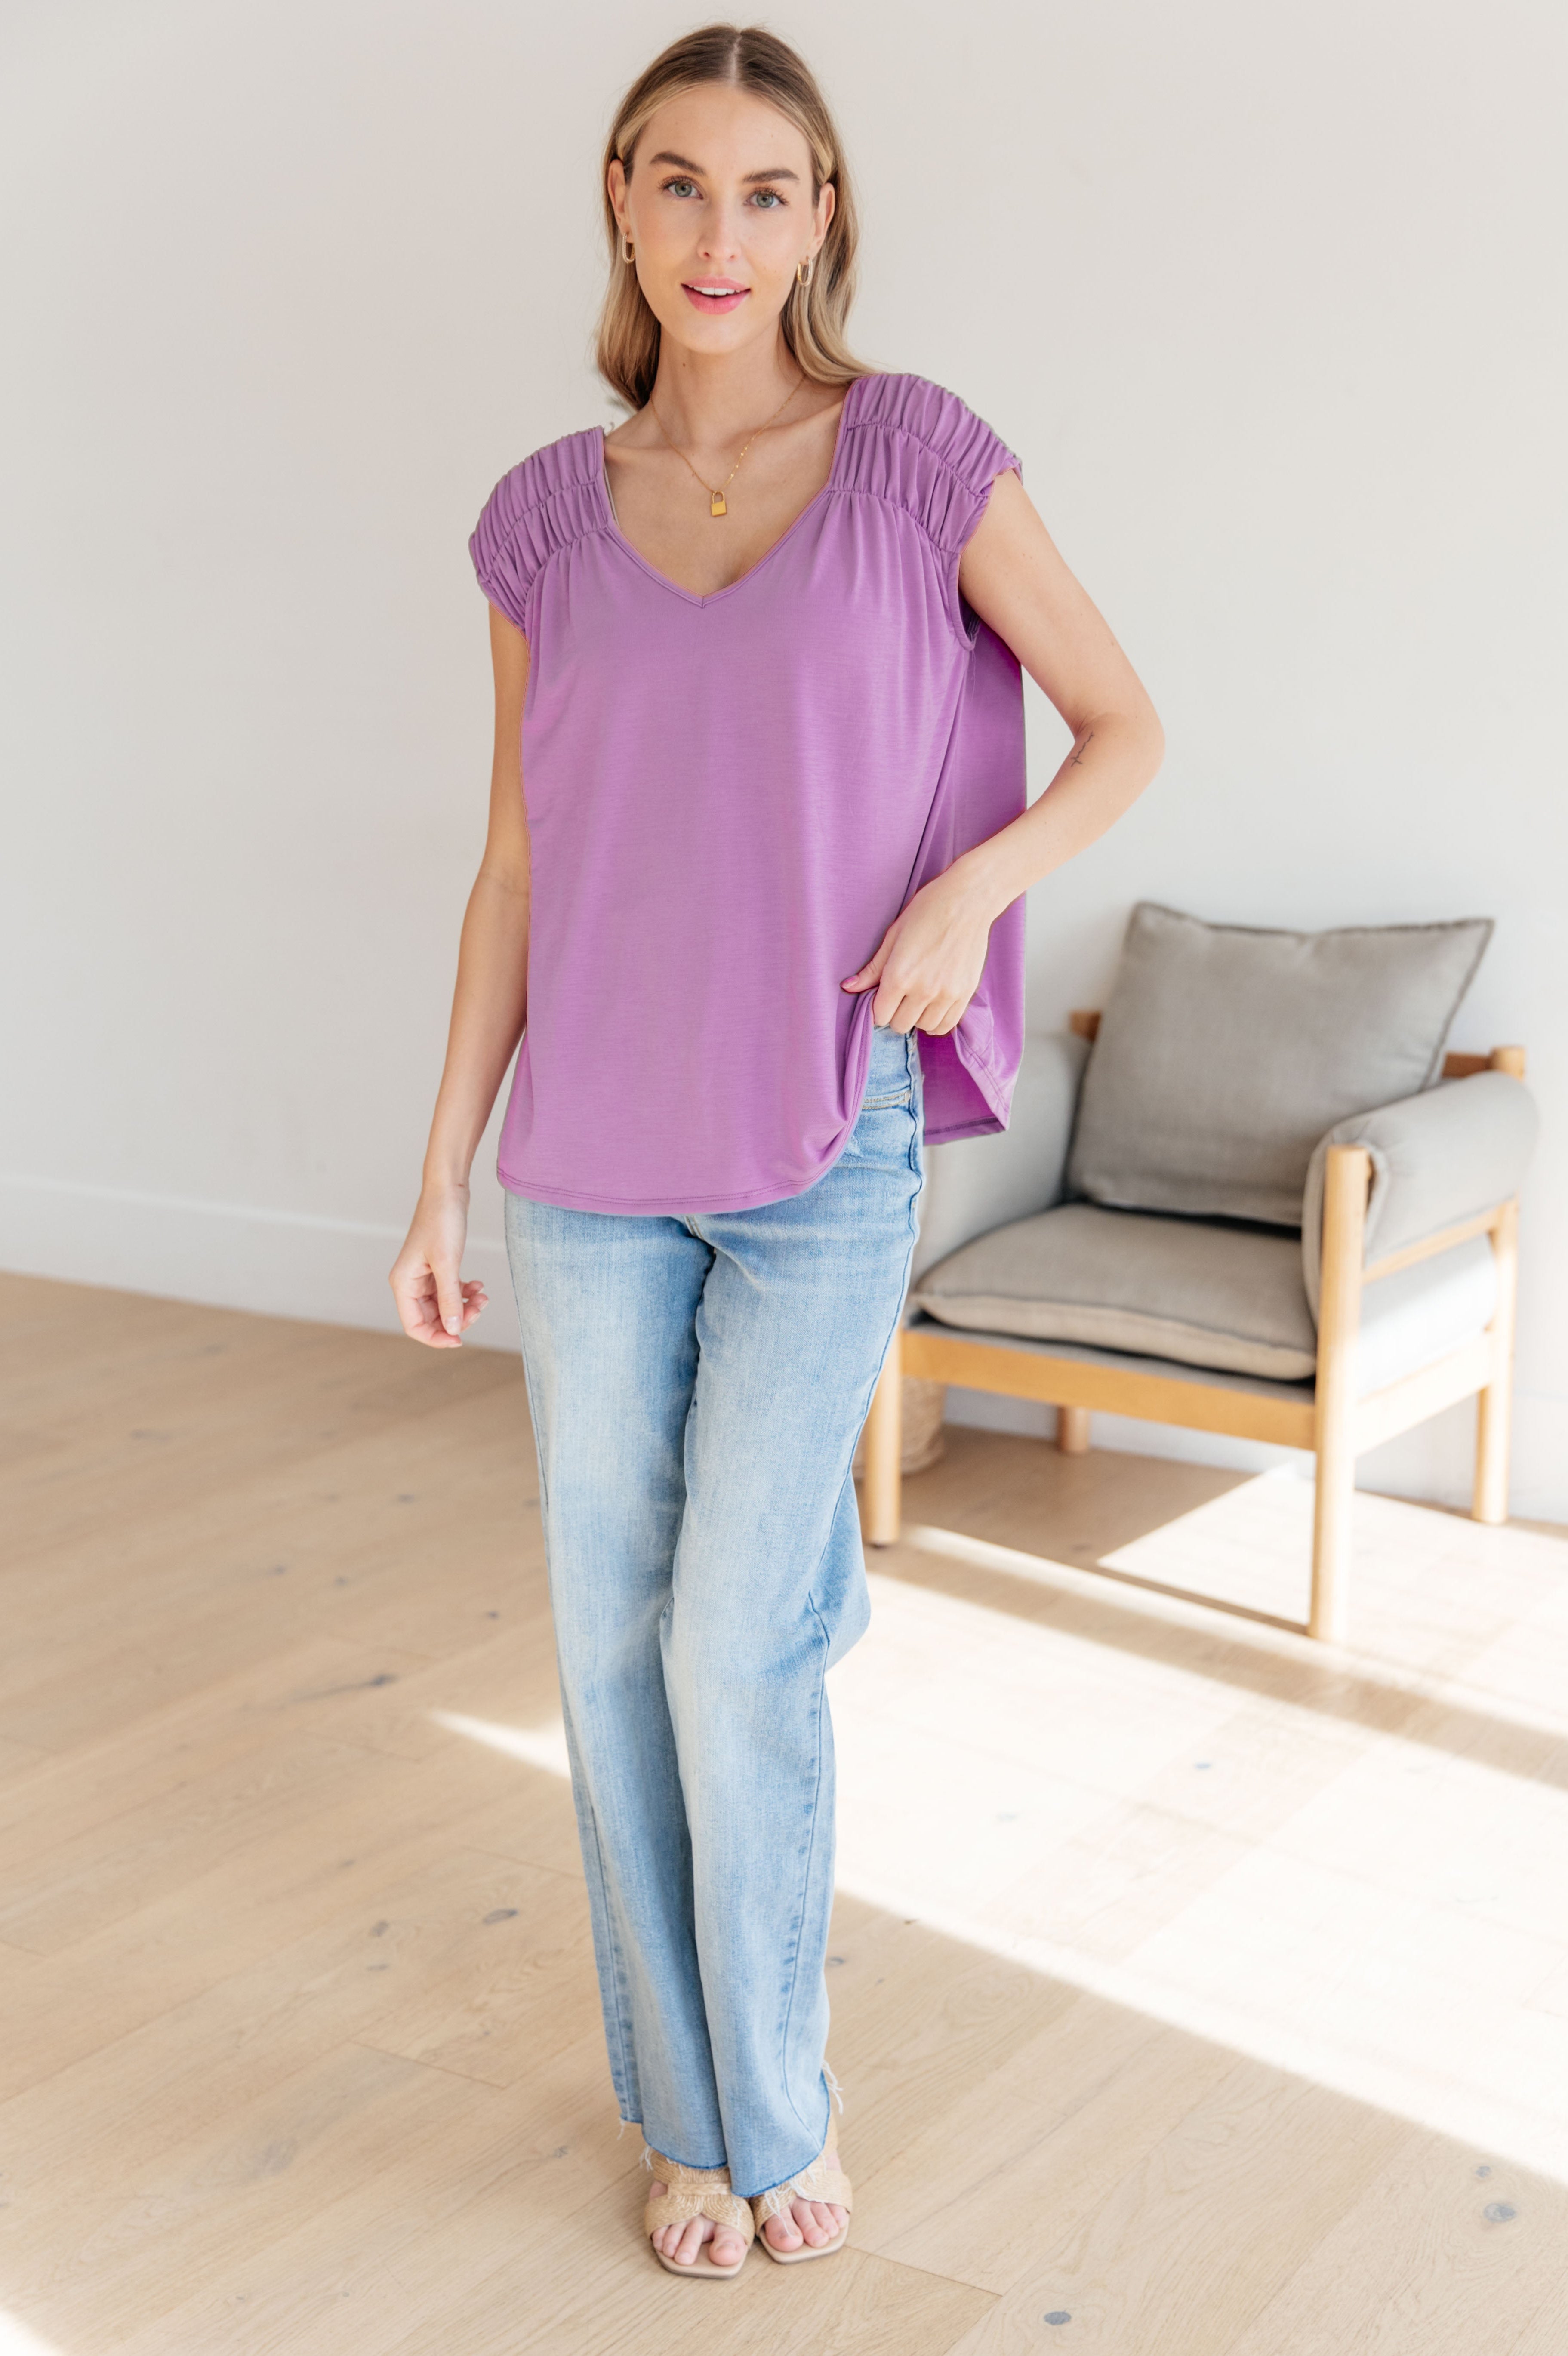 Ruched Cap Sleeve Top in Lavender Ave Shops